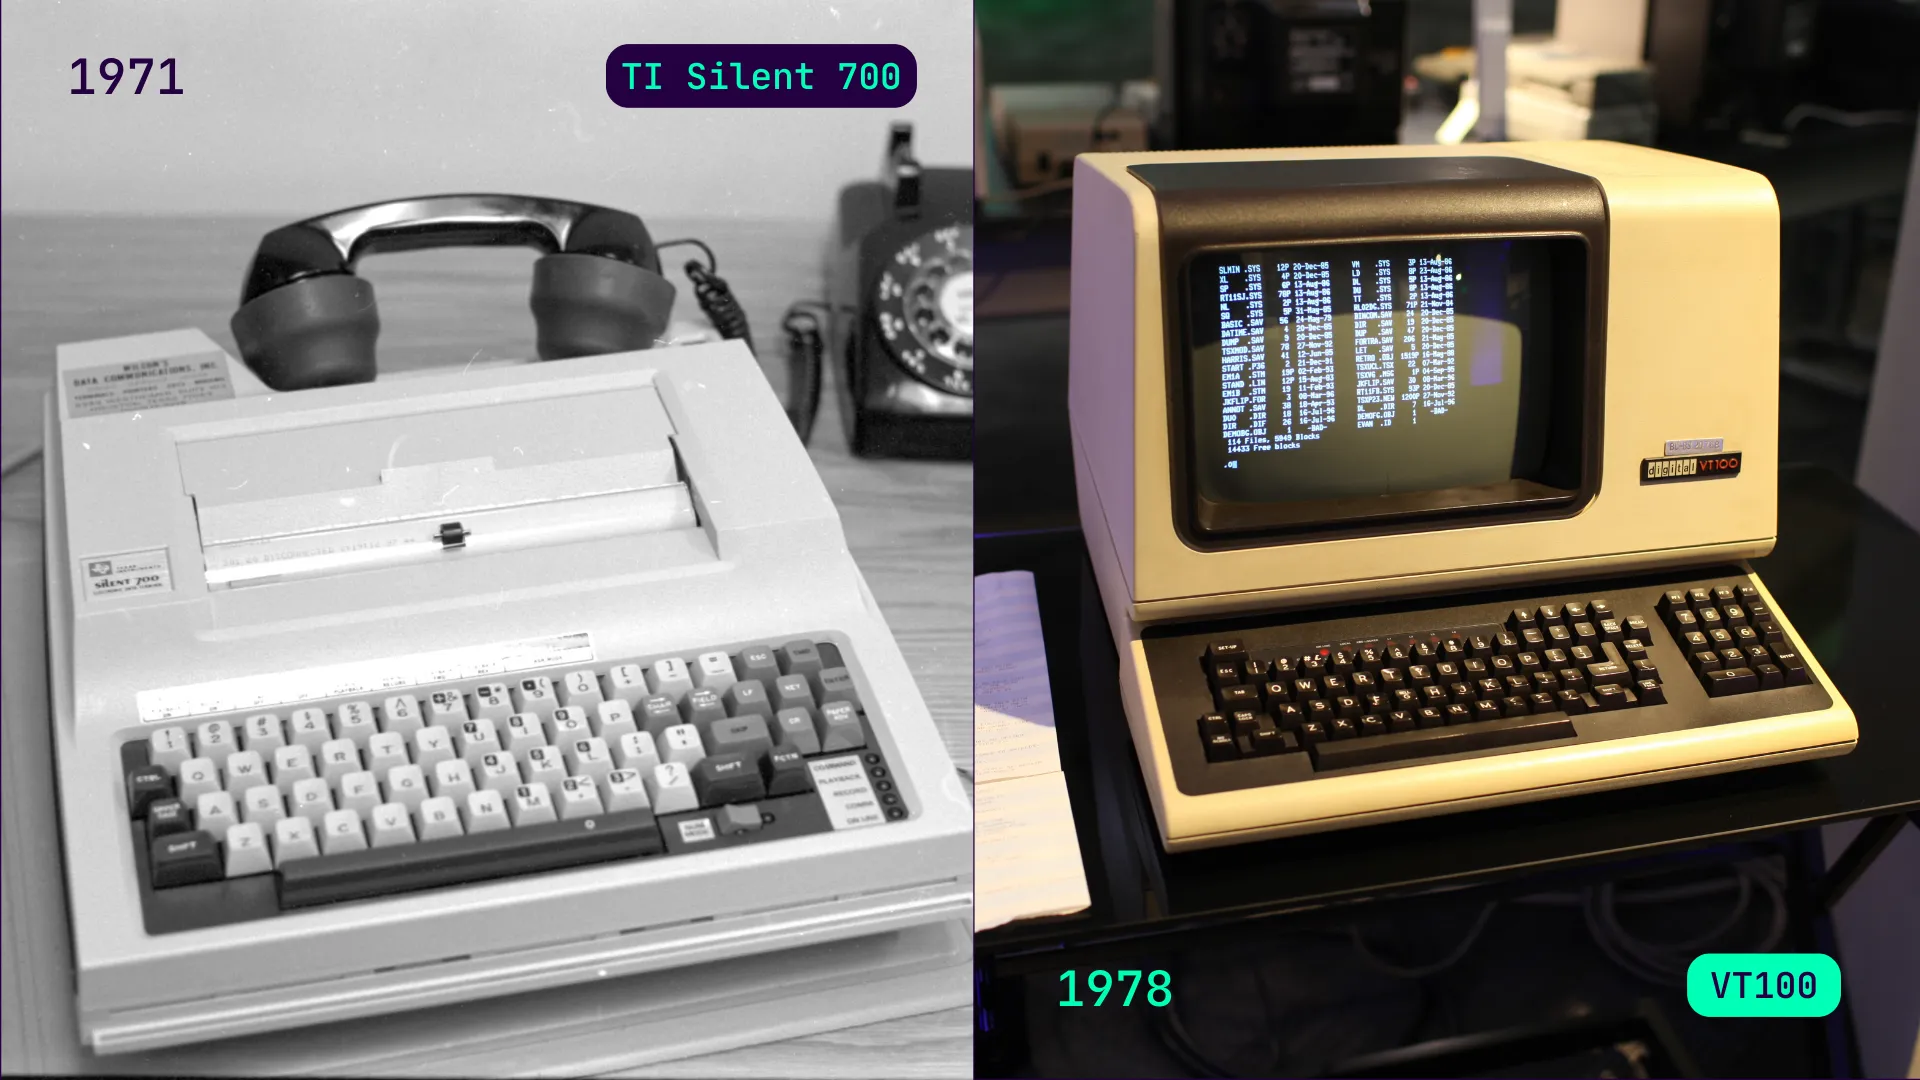 TI Silent 700 and VT100